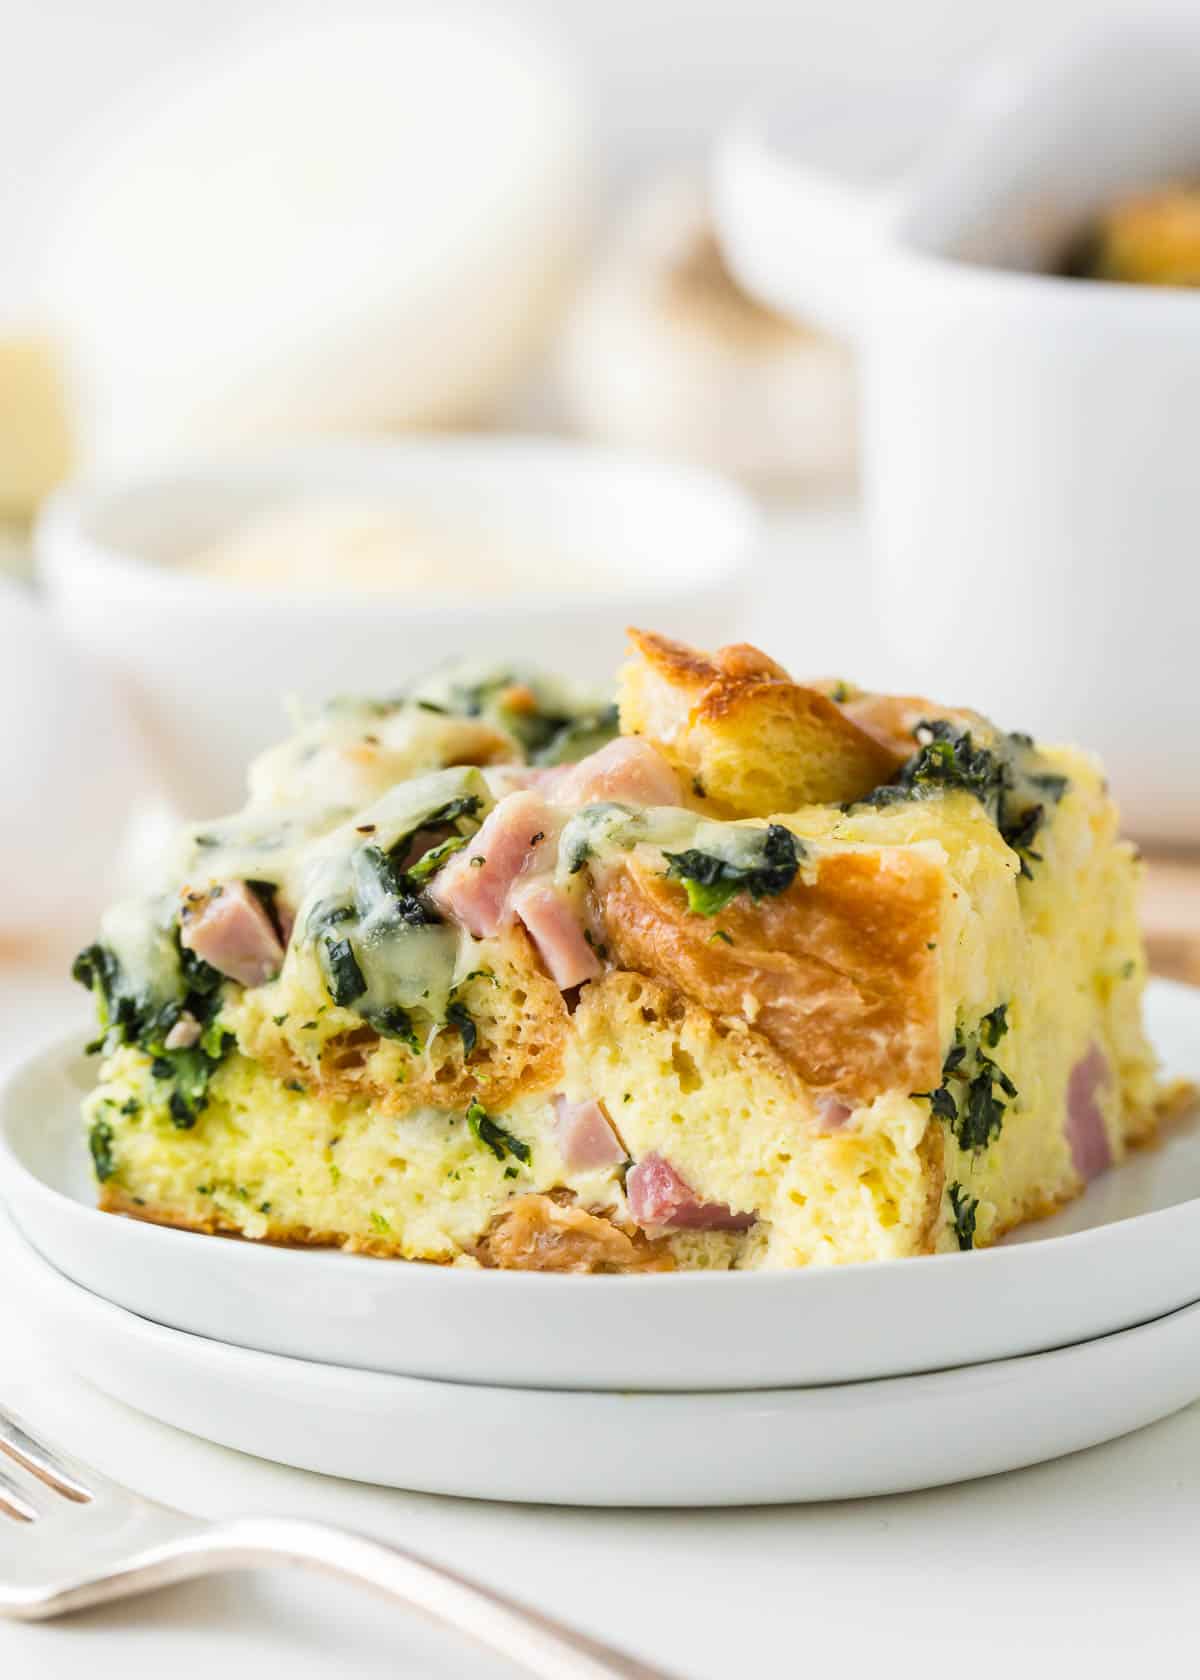 Breakfast strata on a white plate.